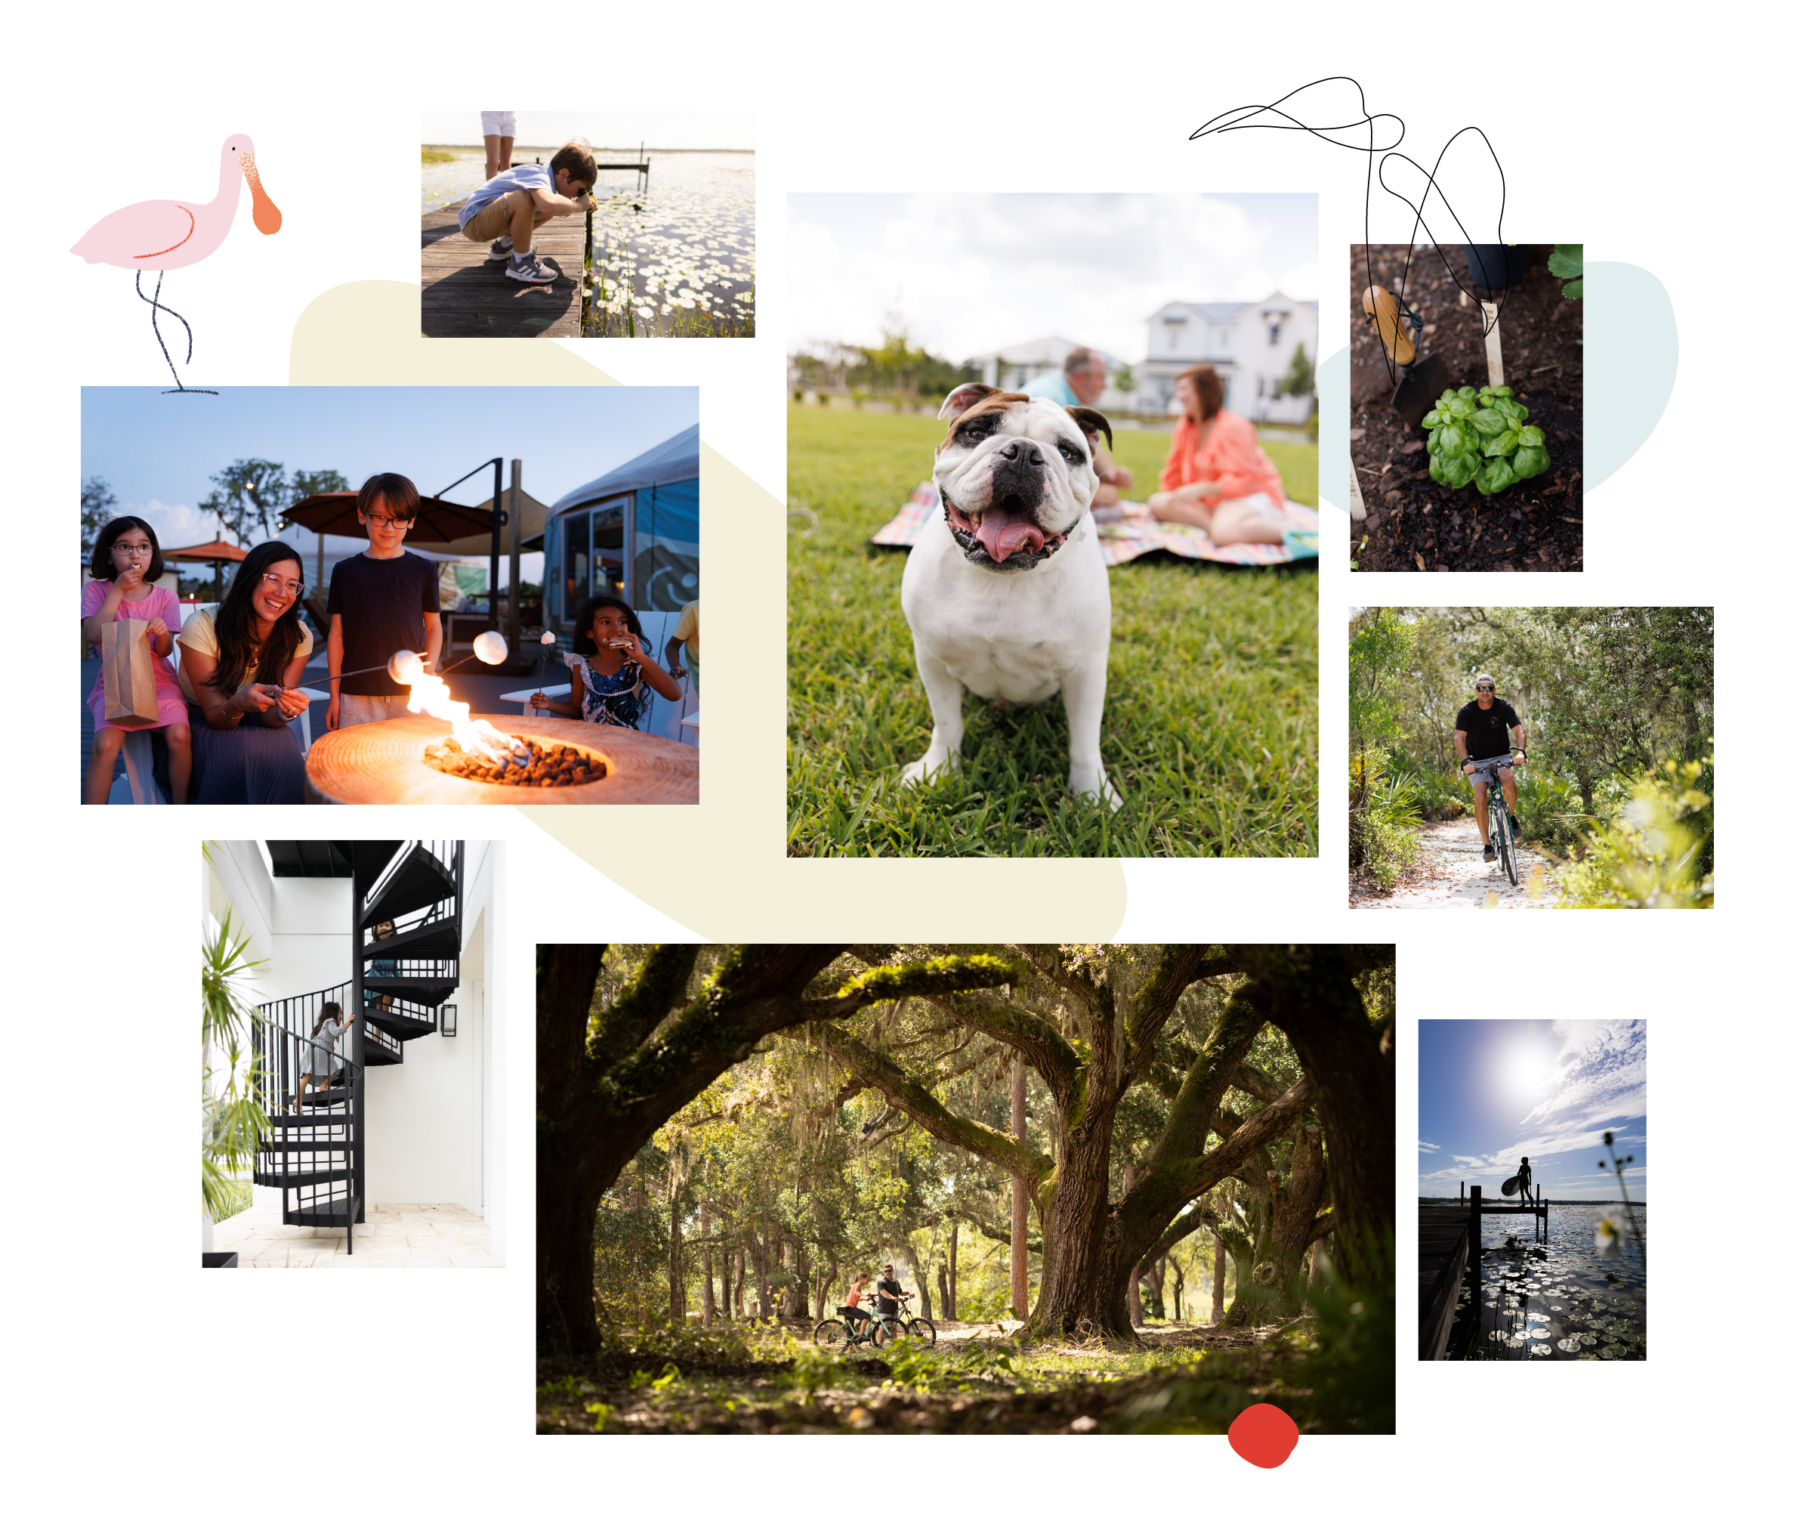 A collage of images and illustrations showing nature, people enjoying the amenities in Sunbridge, and people enjoying the outdoors